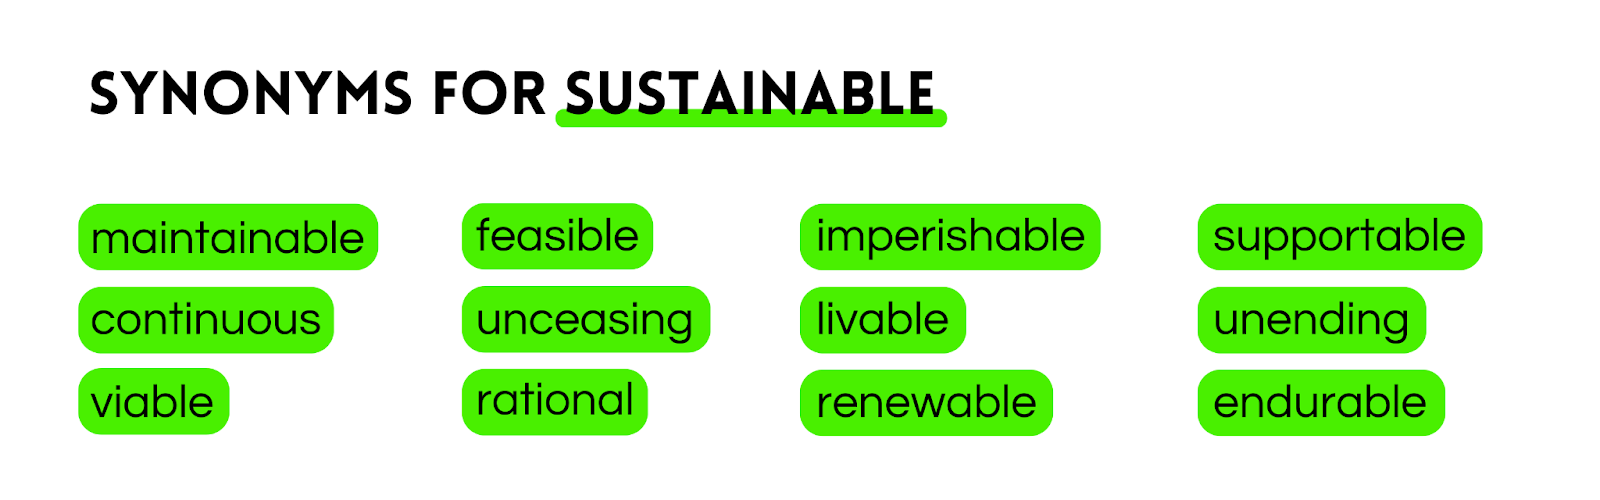 Synonyms for sustainable: maintainable, continuous, viable, feasible, unceasing, rational, imperishable, livable, renewable, supportable, unending, endurable